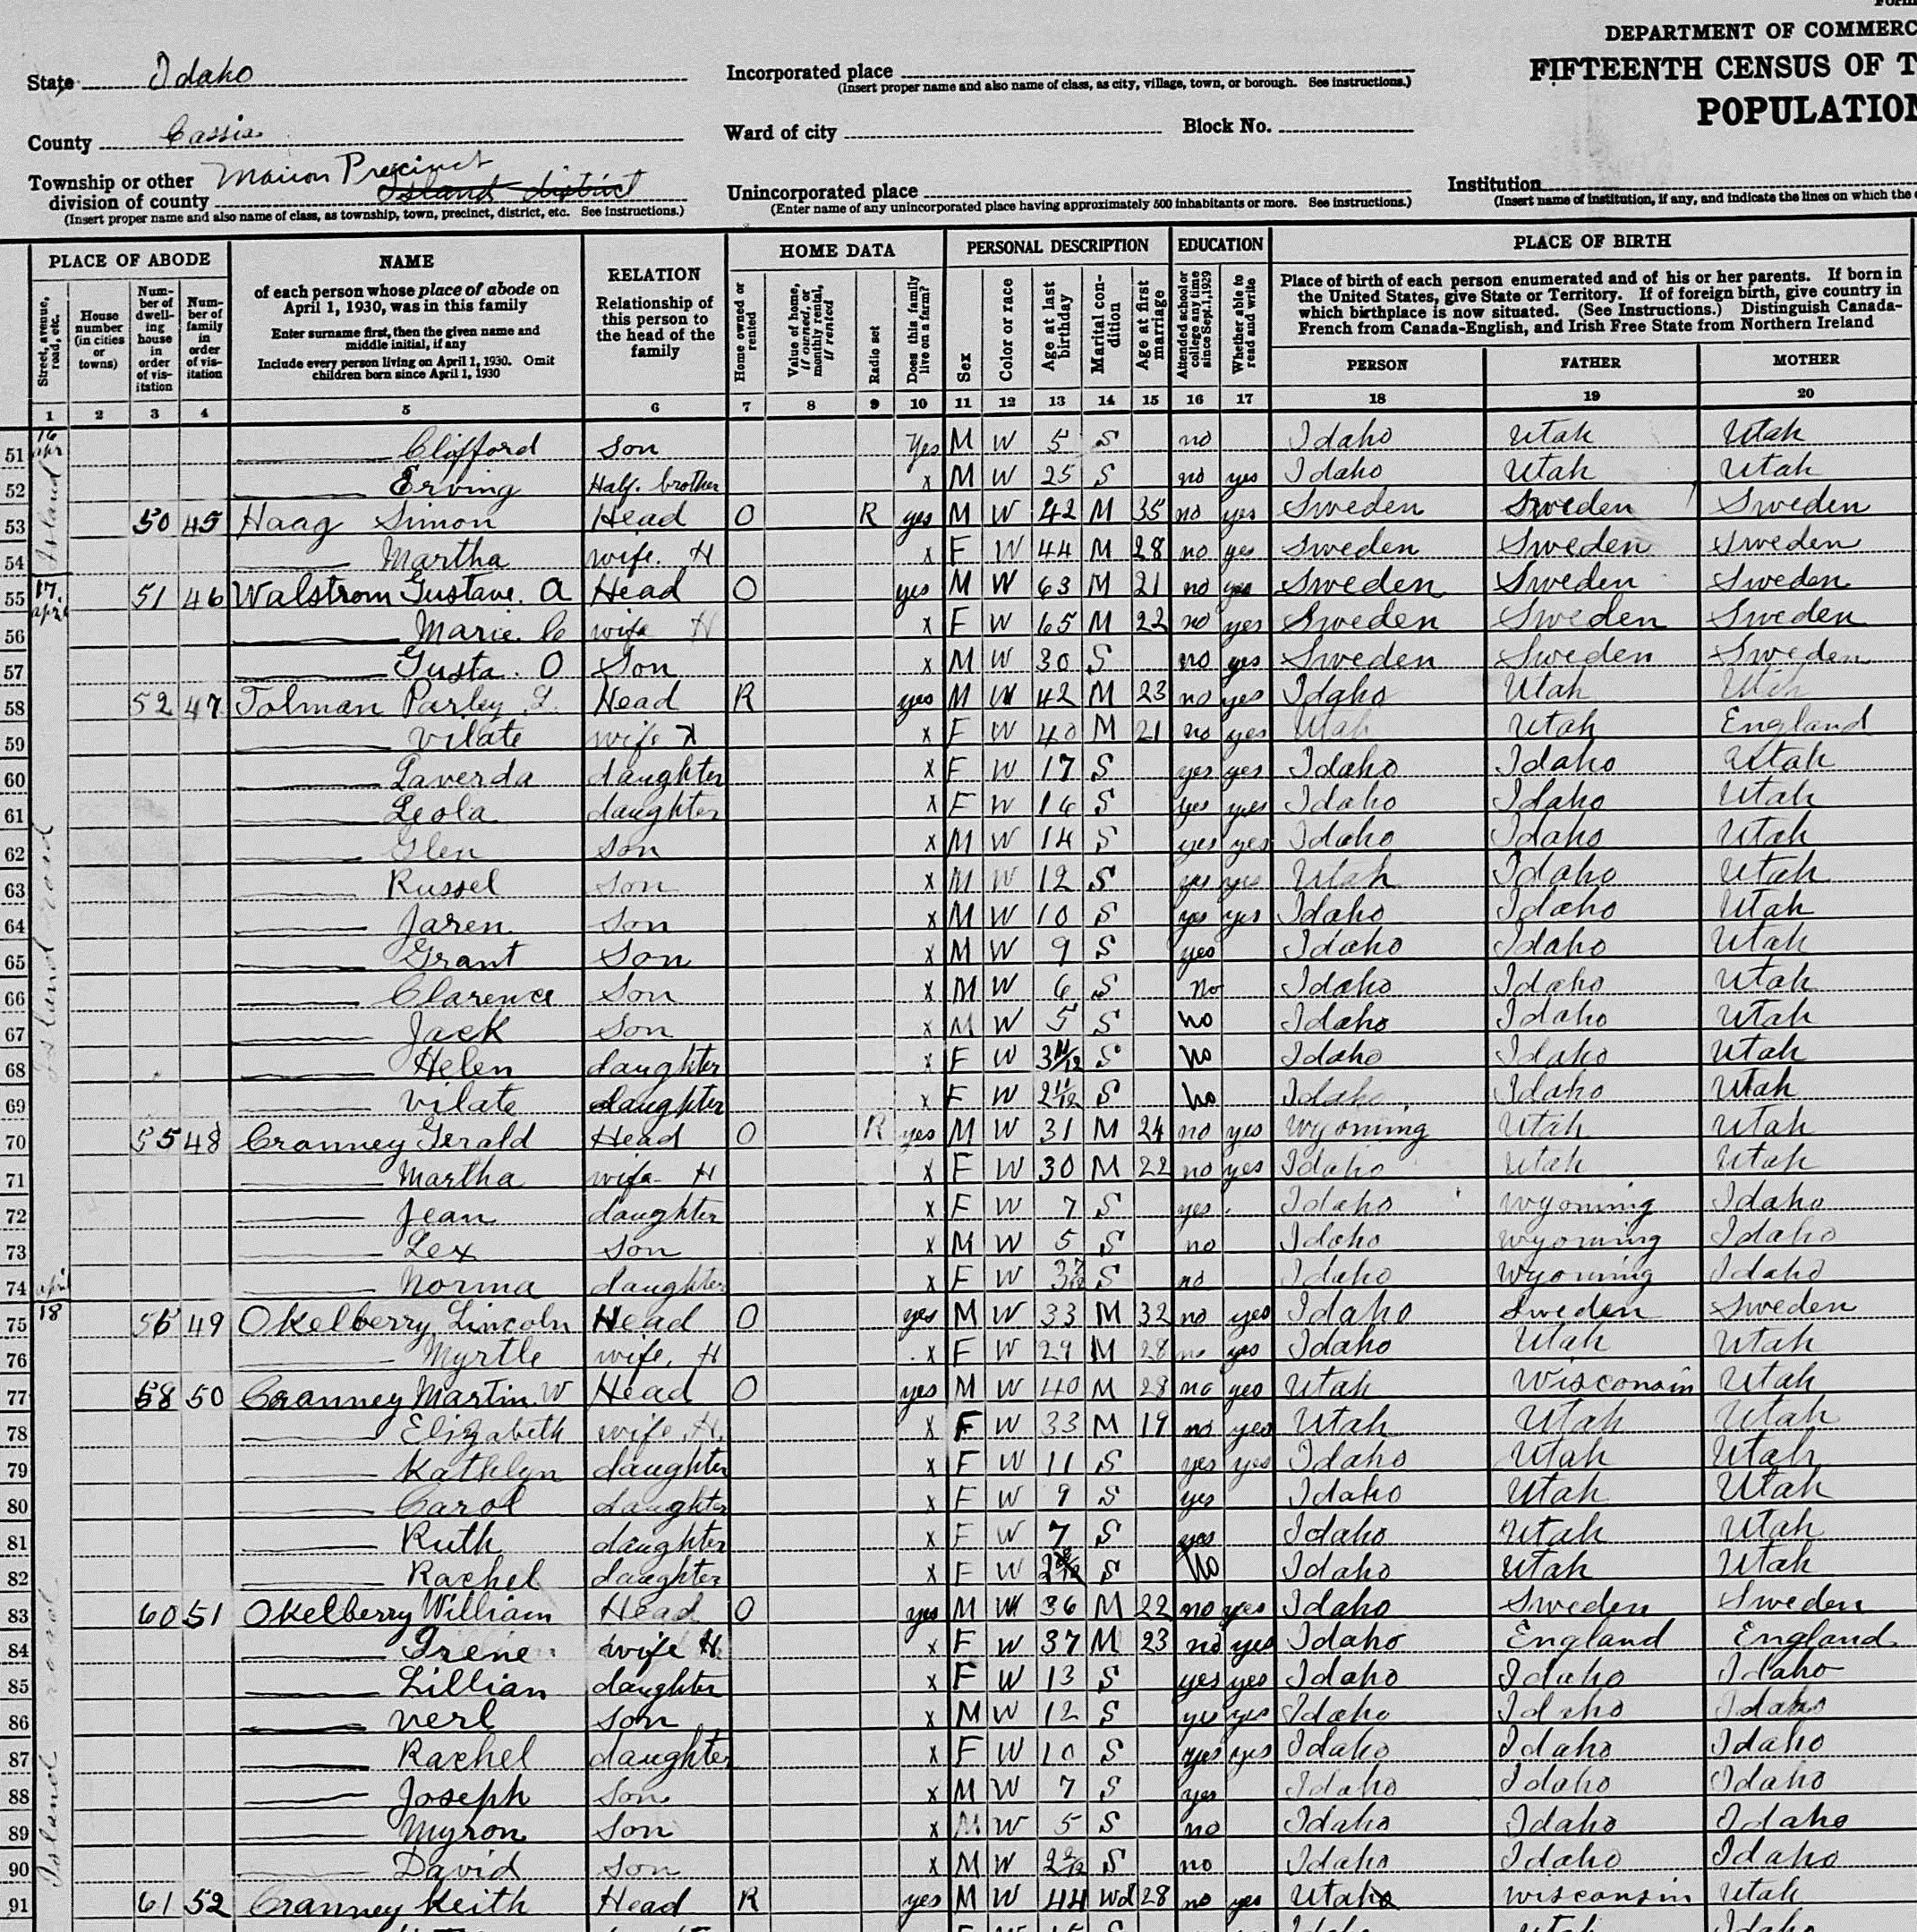 1930 U.S Census Record-Parley Lambert and Lydia Vilate Tolman and Wilber T. Cranney and Louisa Tolman